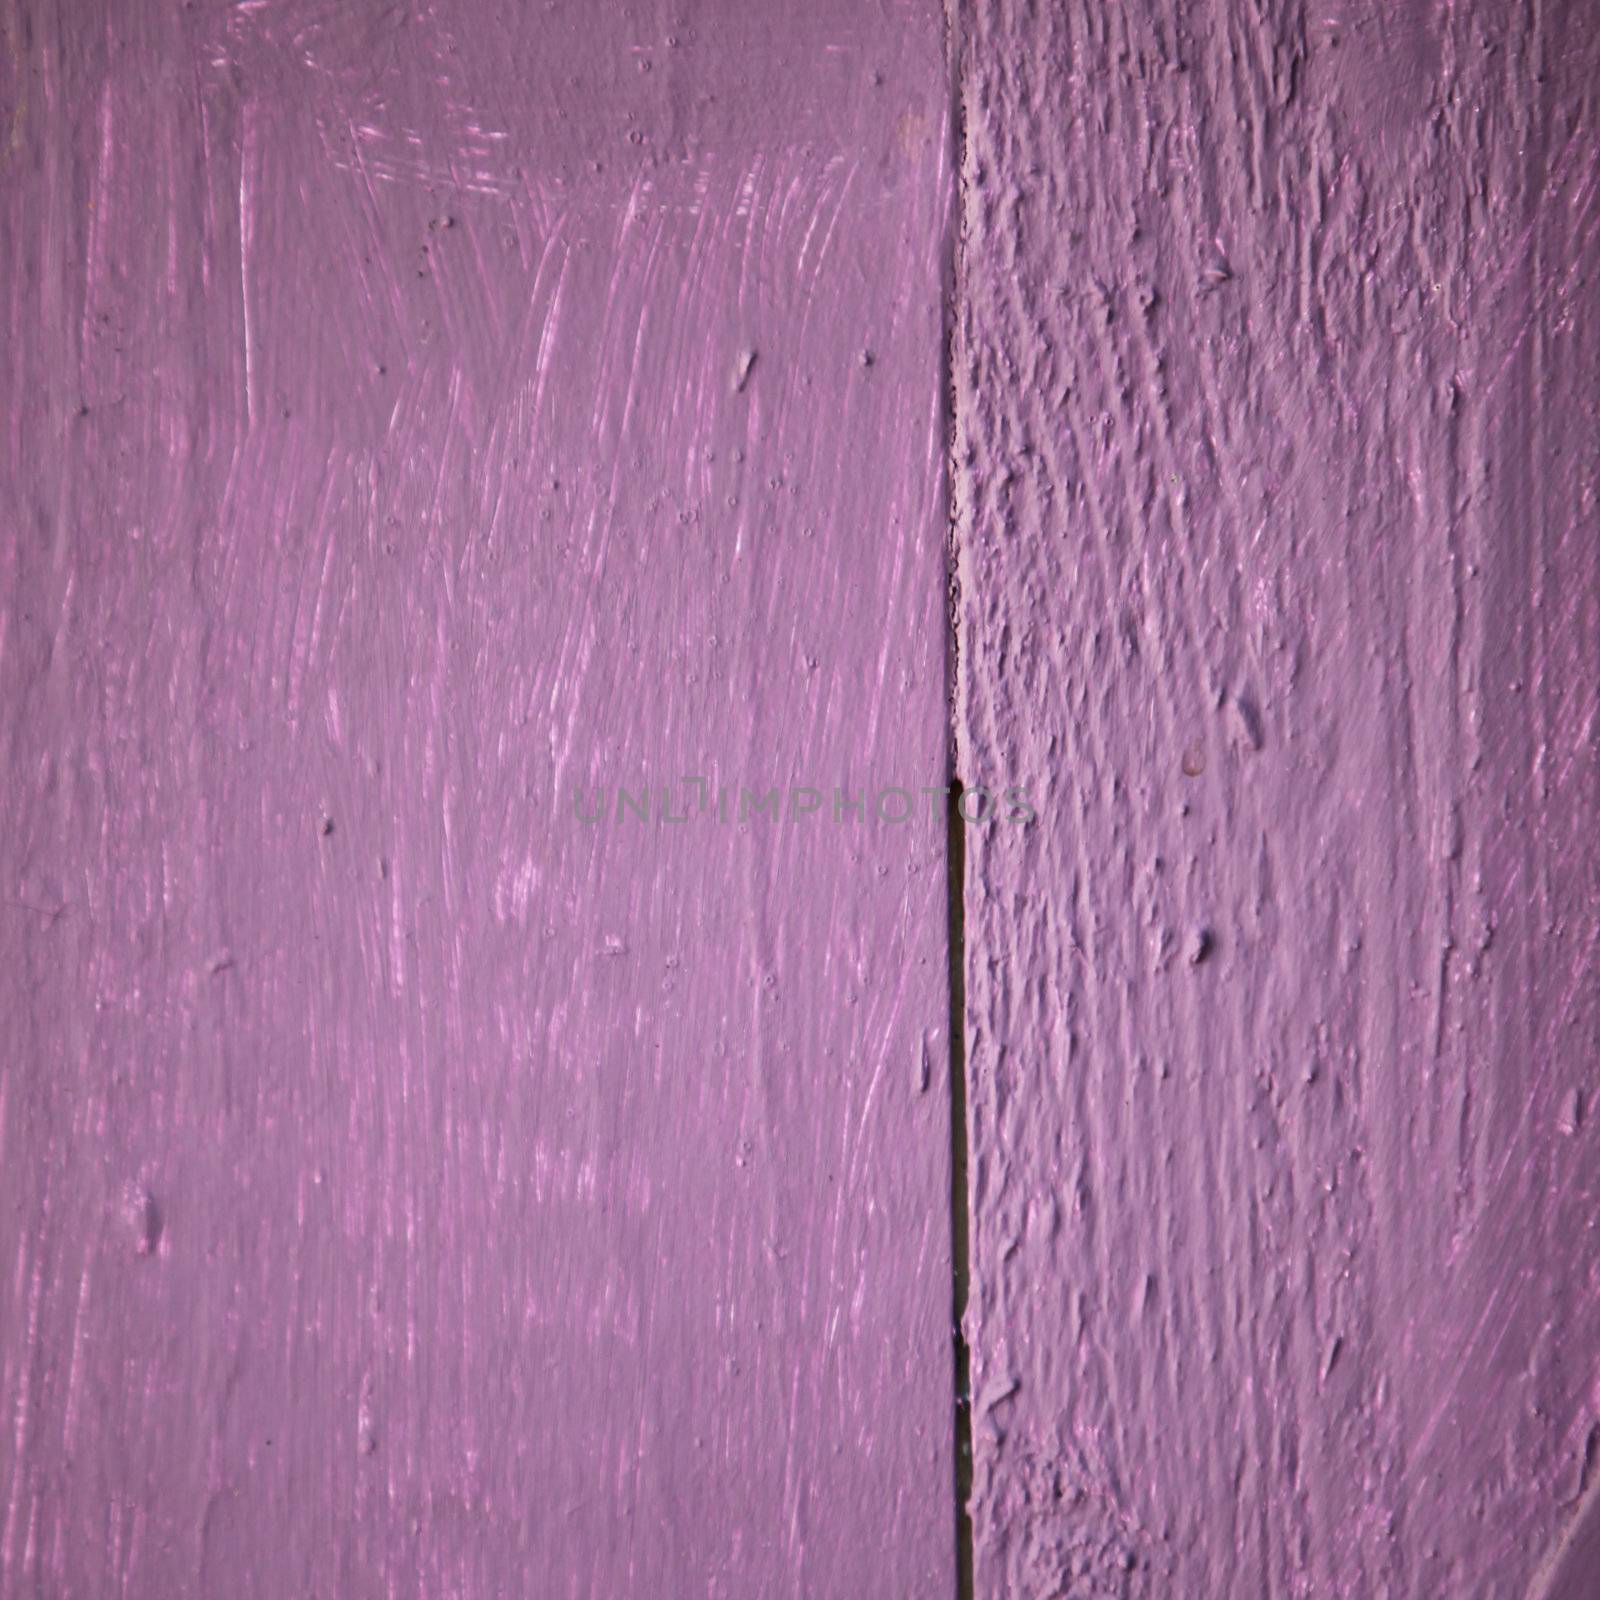 Background texture of painted purple wood by Farina6000